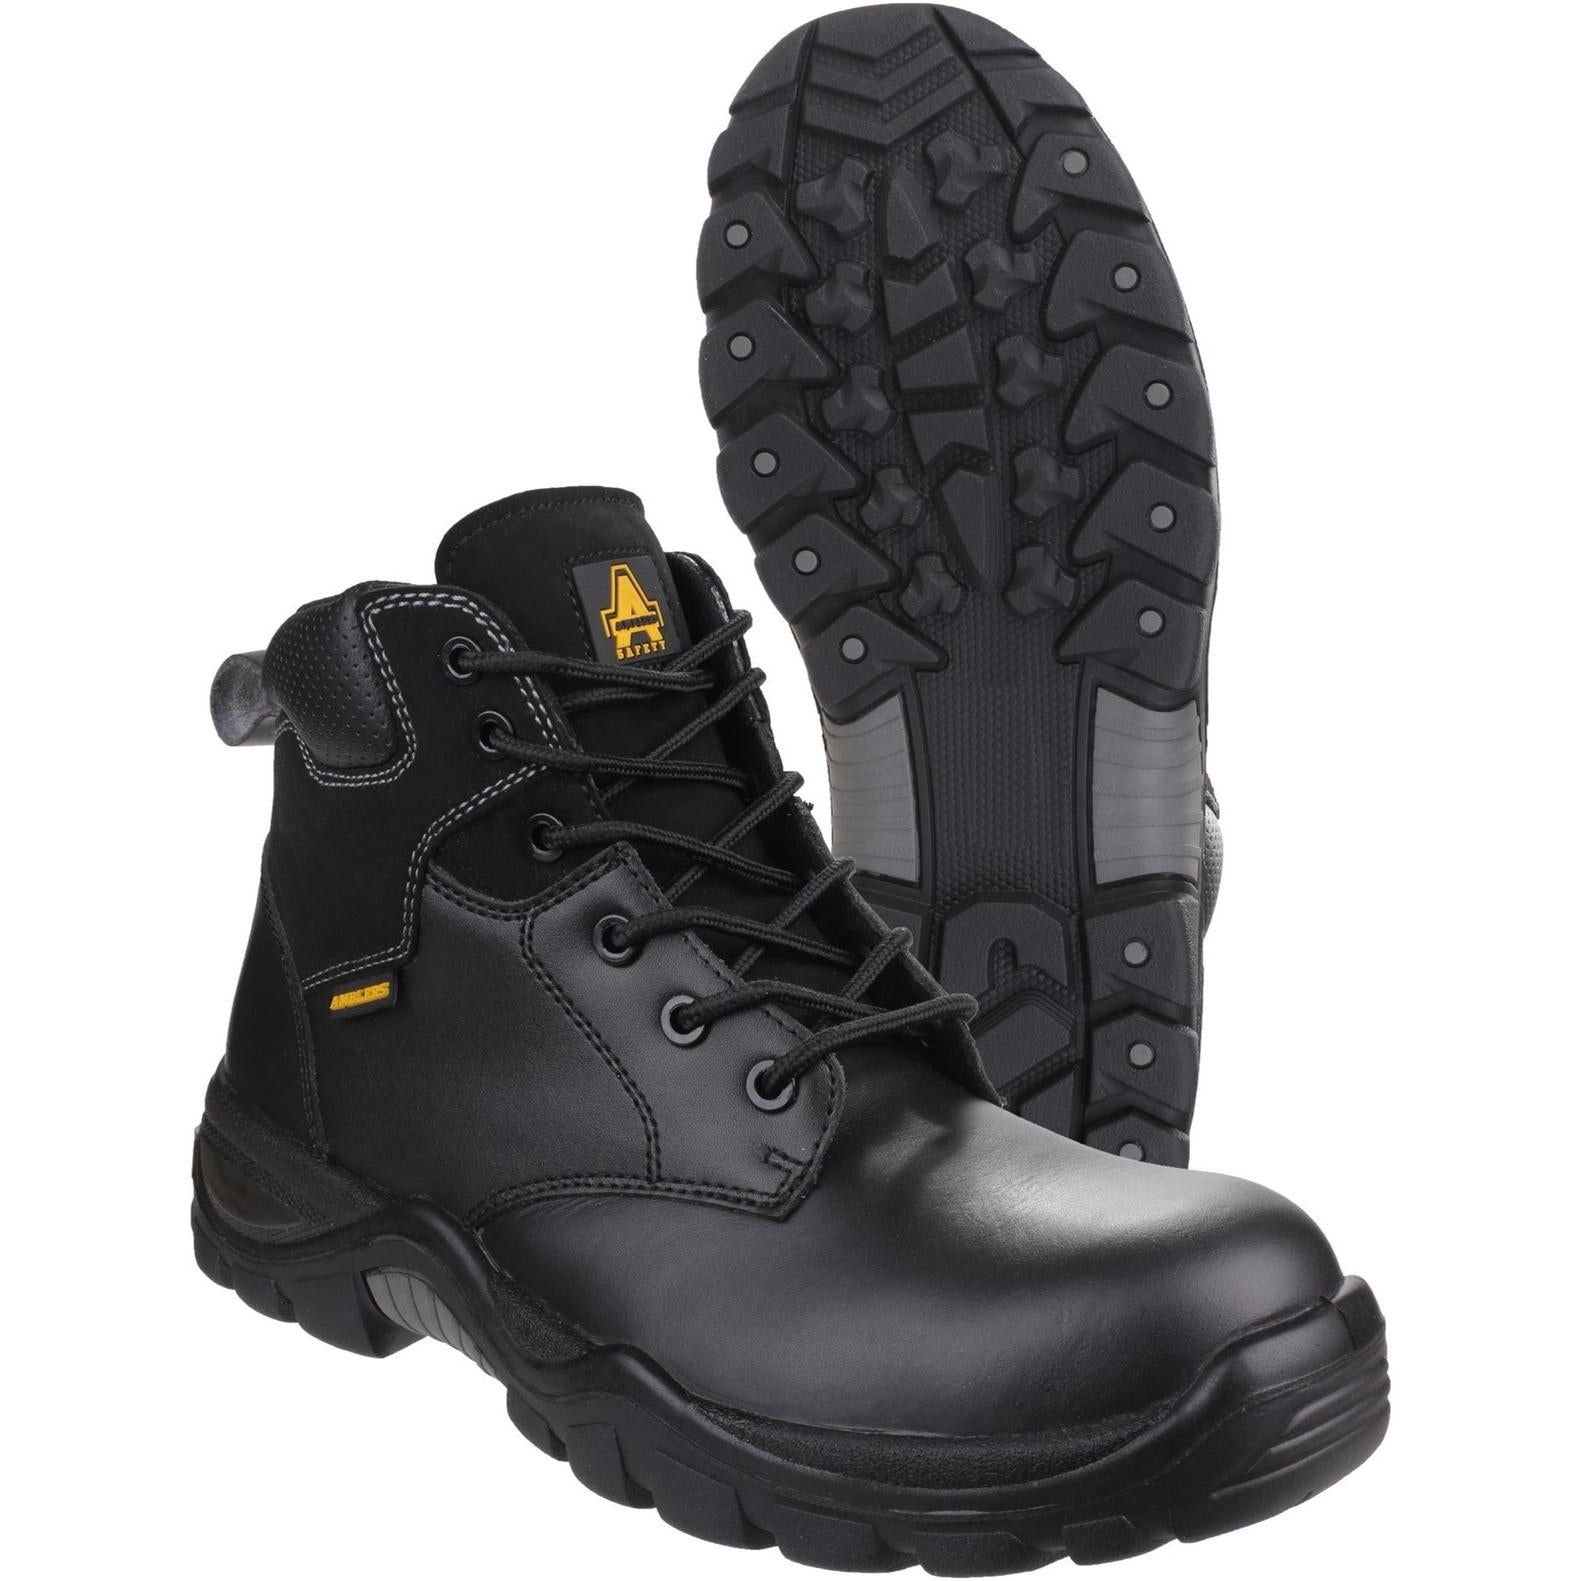 Amblers Safety AS302C Preseli Non-Metal Lace up Safety Boot